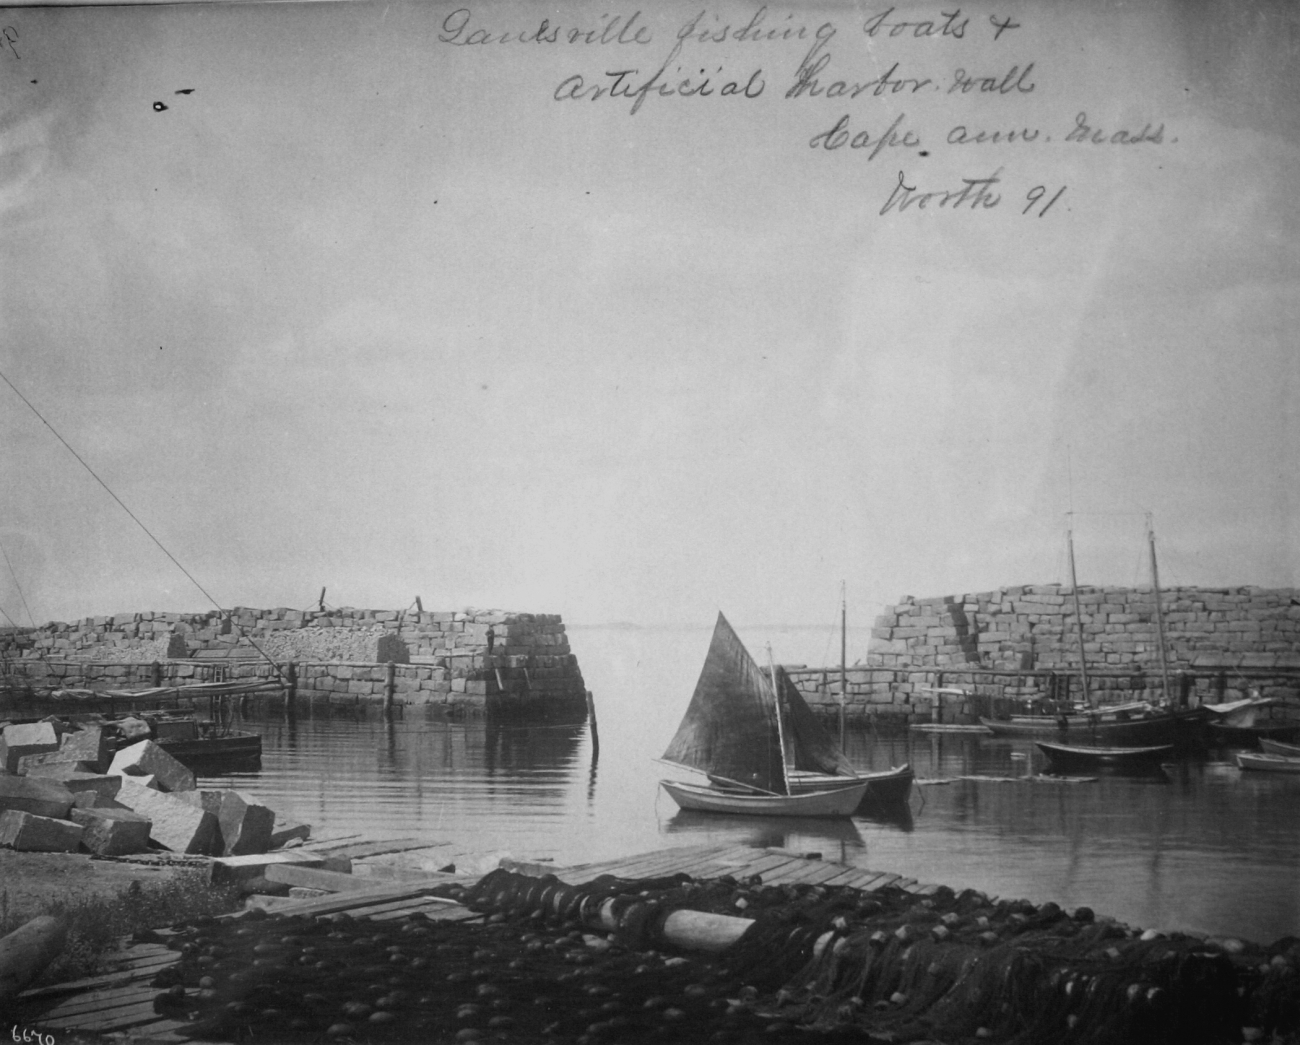 Fishing boats and artificial harbor wall, Cape Ann, MA, Worth, 1891